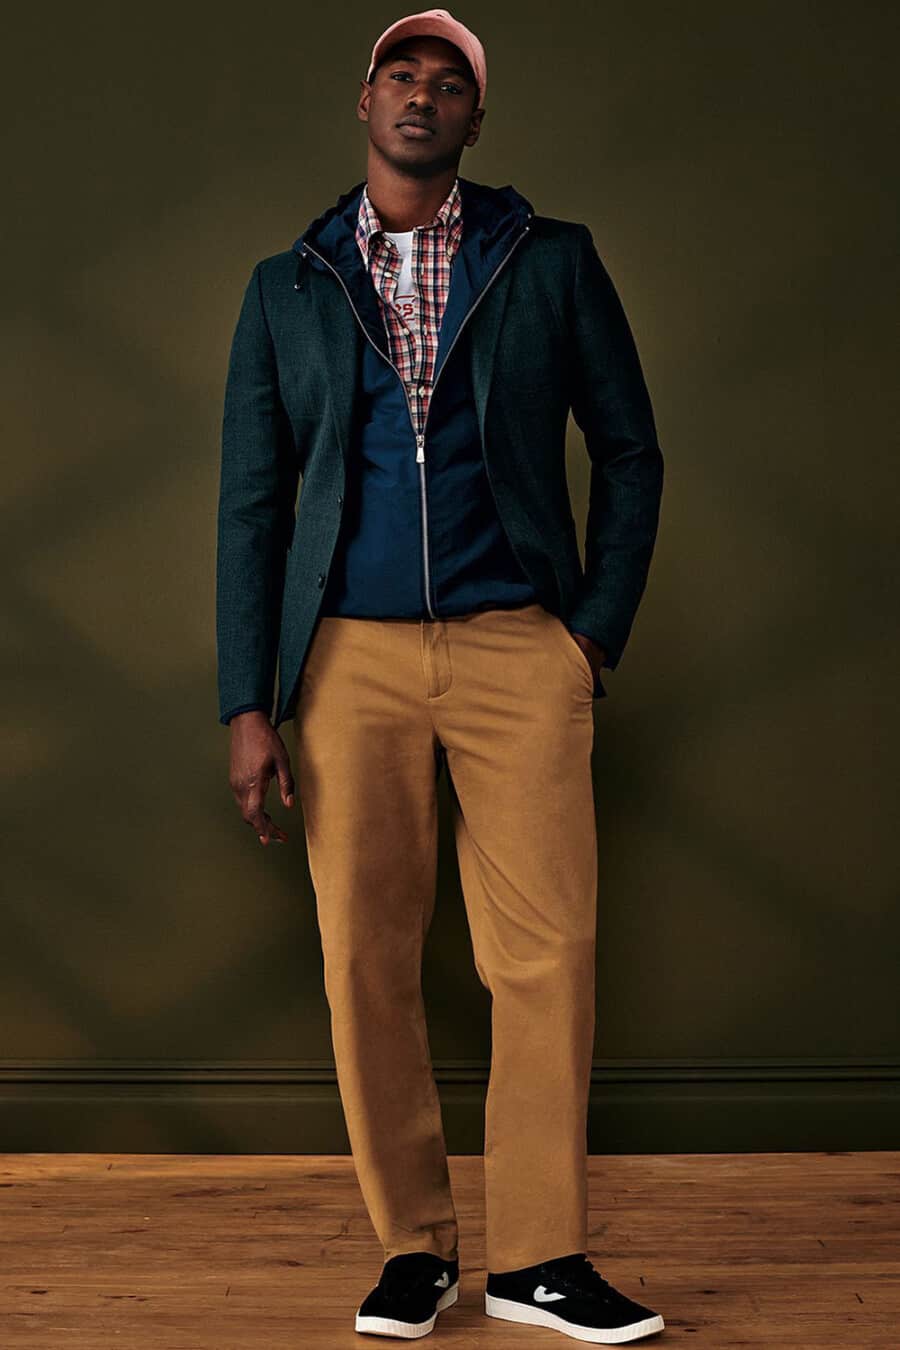 Men's brown pants, check shirt, navy zip up hoodie, green-blue blazer and black canvas skate shoes outfit